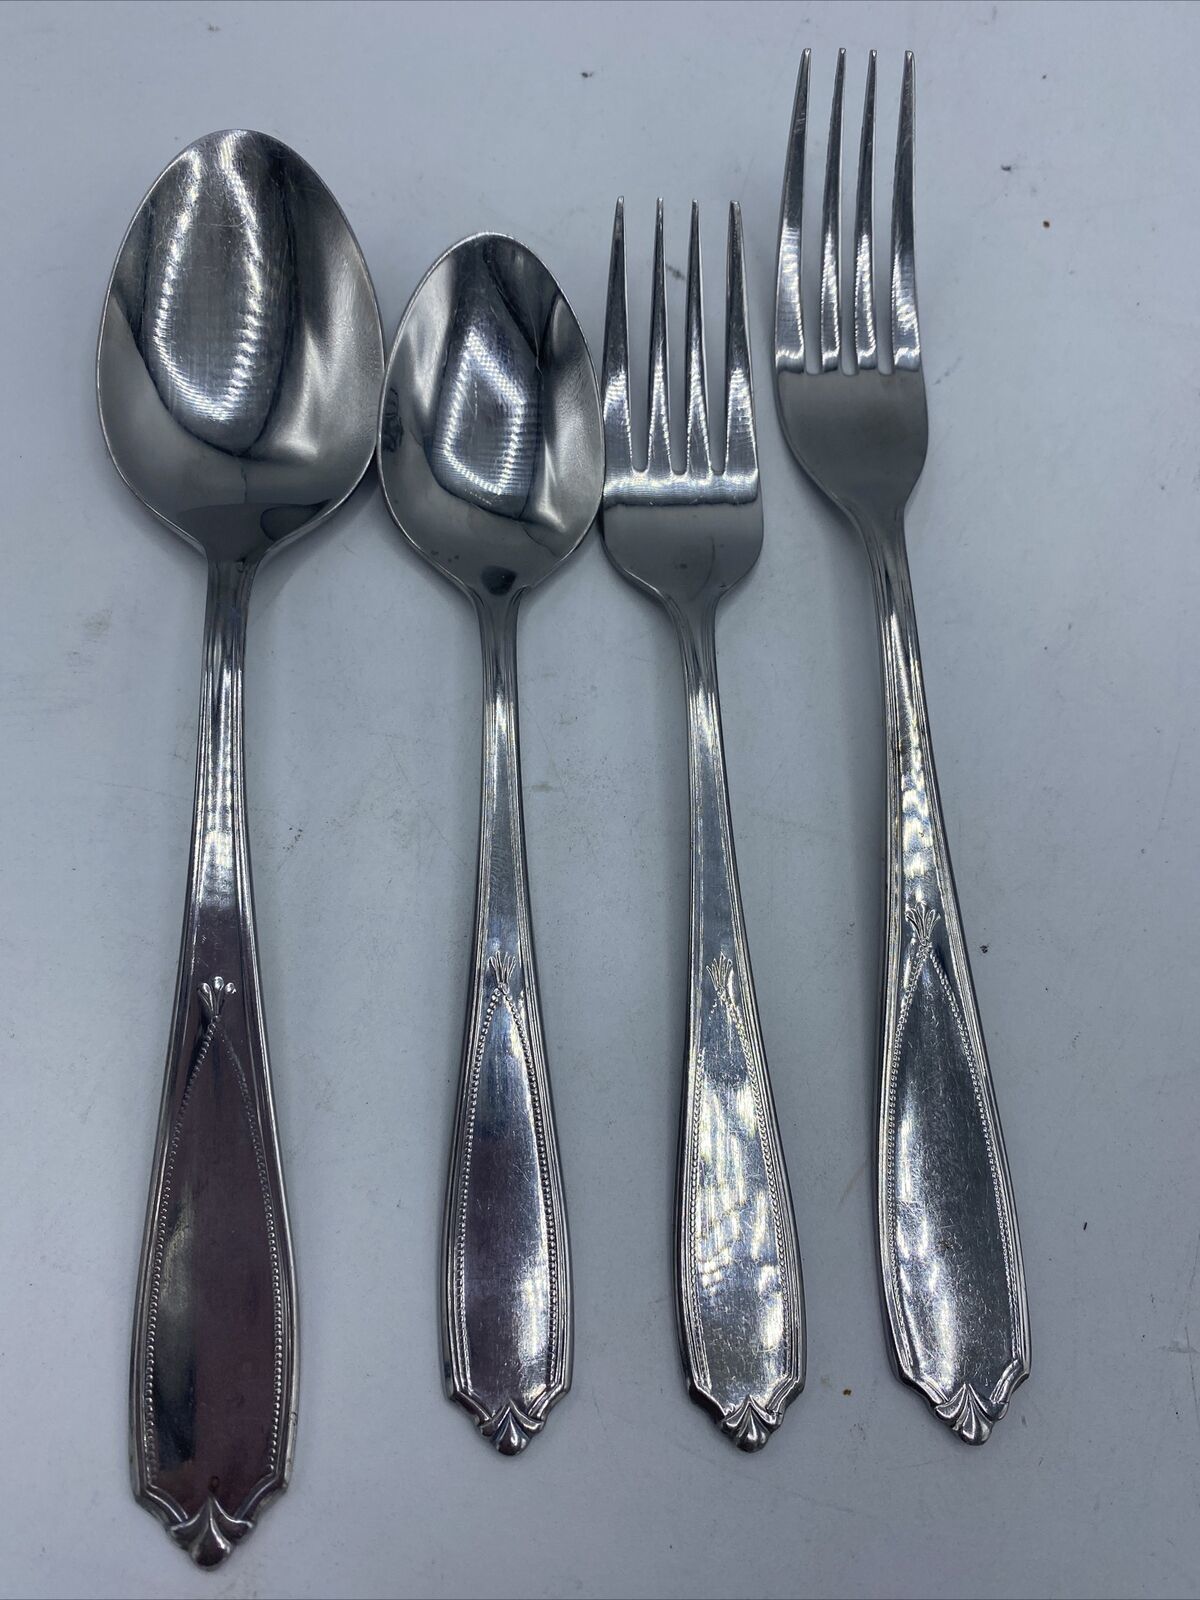 Farberware Stainless Steel CASSELBURY 4 Piece Place Setting Glossy 18/8 Retired - $14.84